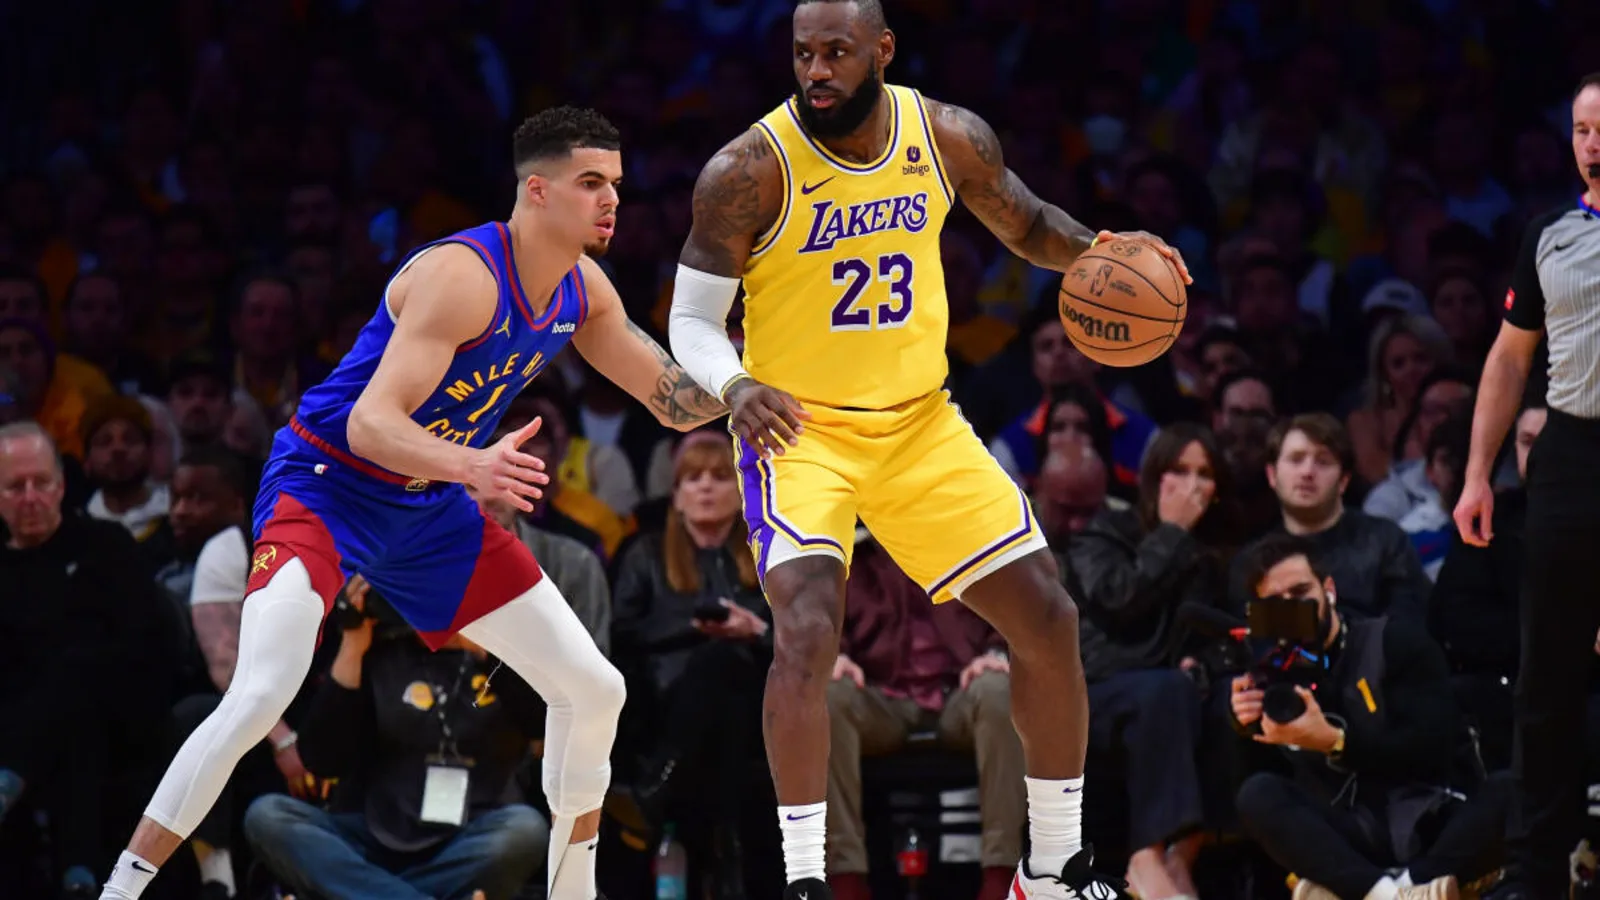 Lakers on the Brink LeBron James and the Pressure of a 3-0 Playoff Deficit